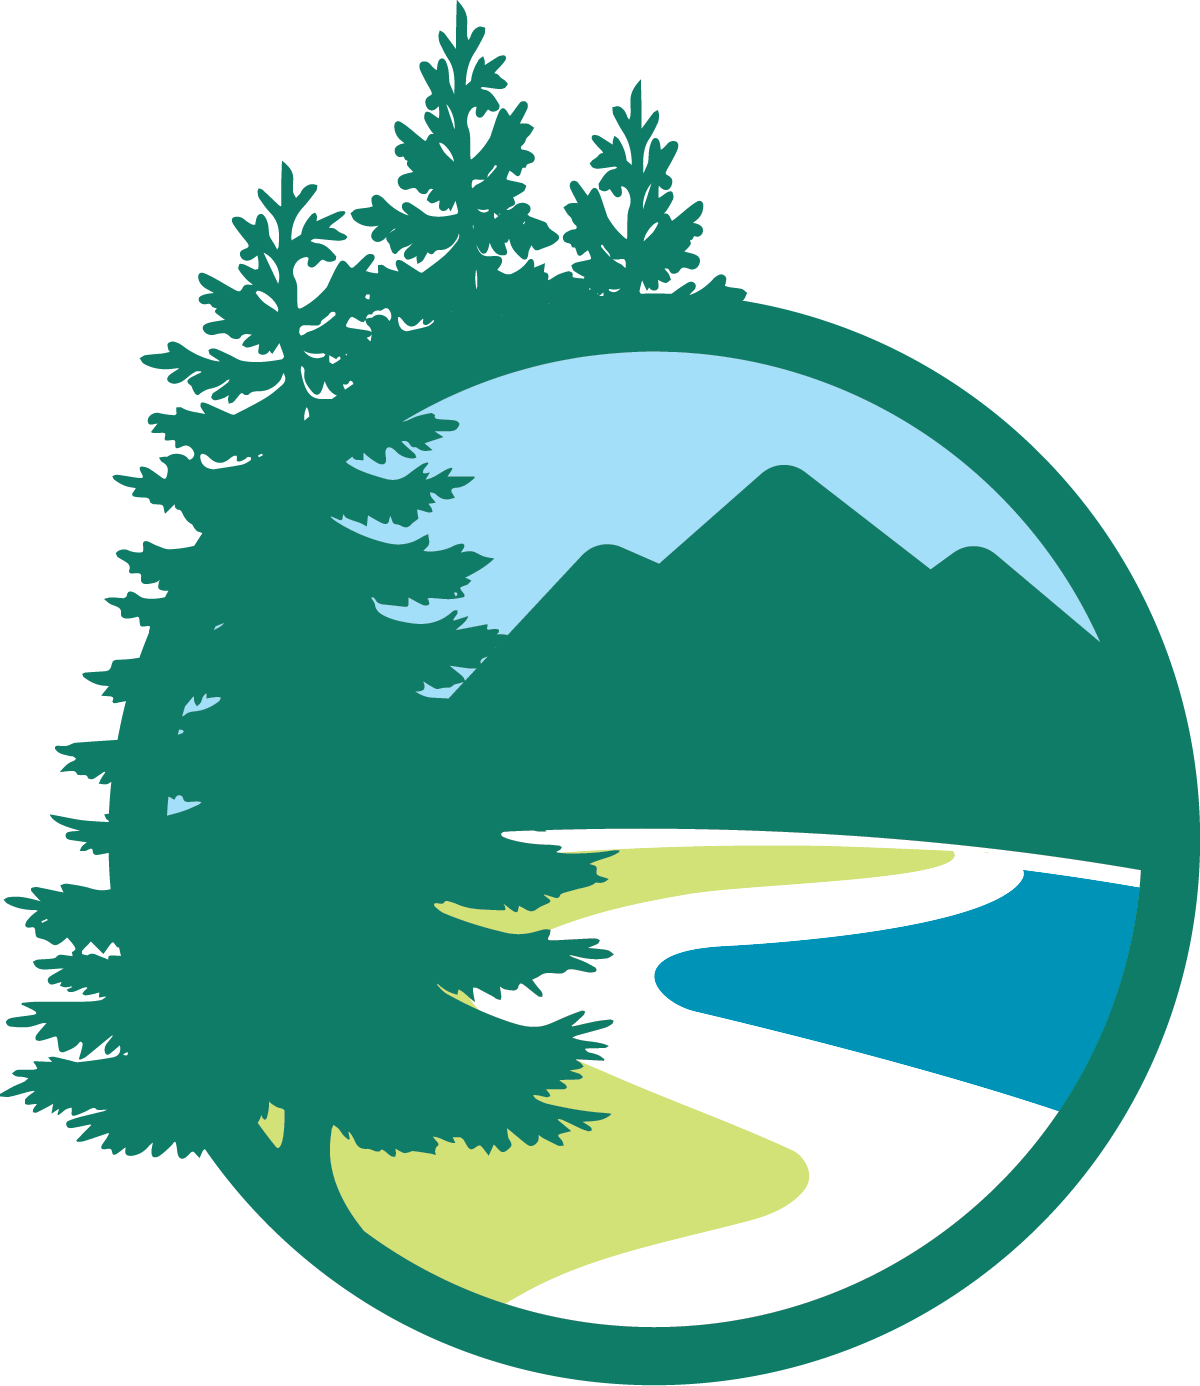 2023 ANCA Summit Logo: A circle that contains blue-green mountains and a wave leading up to the mountains. On the left of the circle, three pine trees stand out beyond the circle.